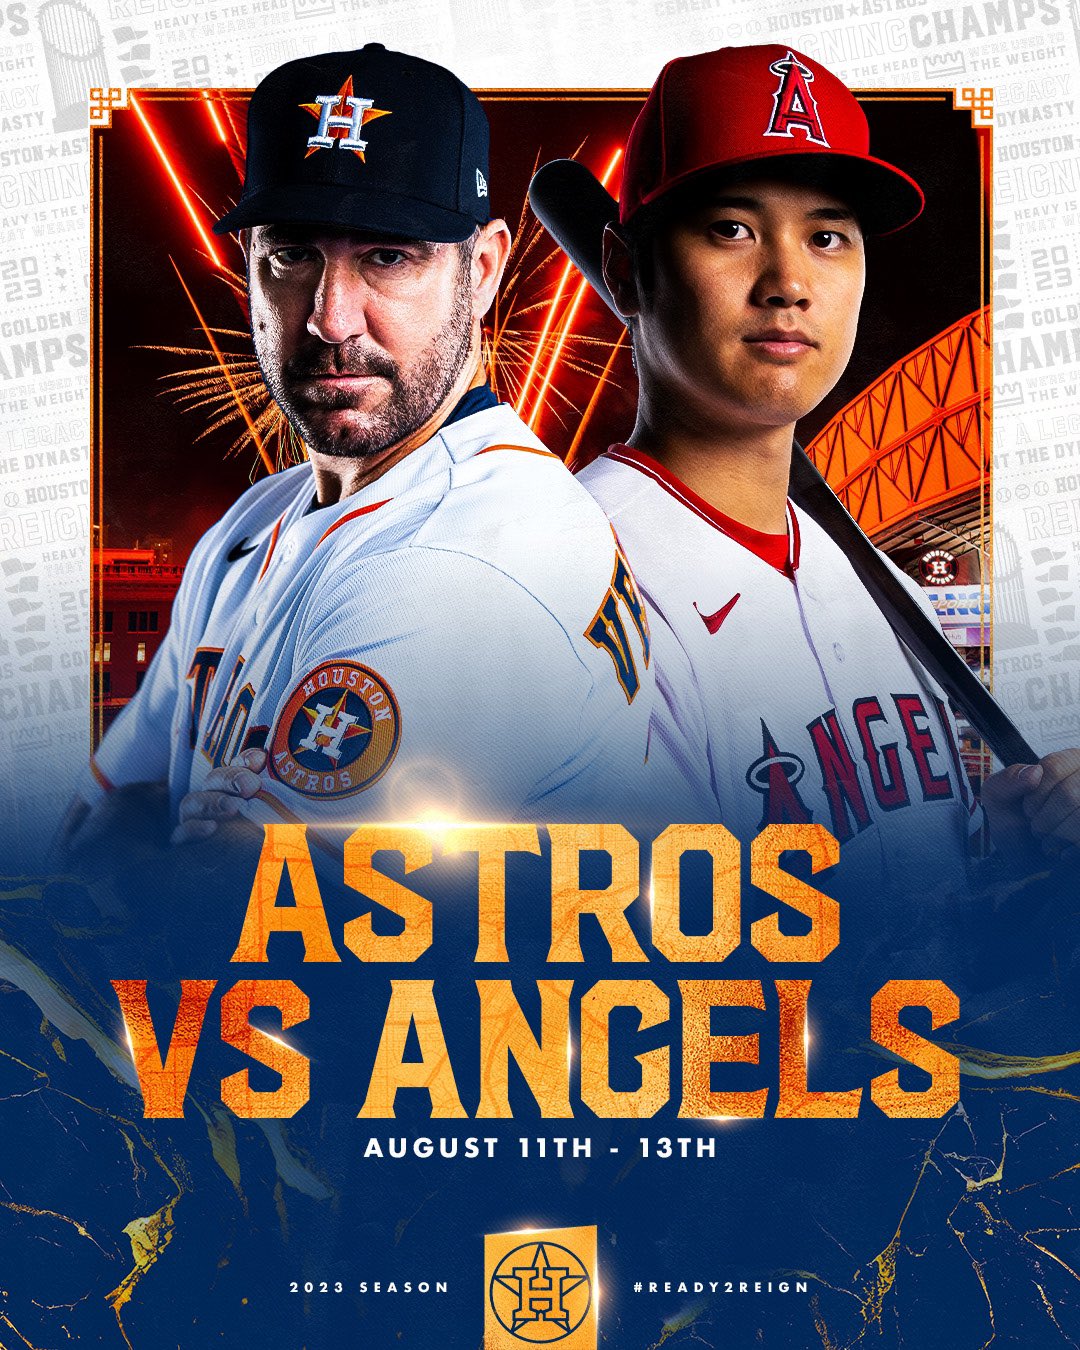 astros game august 11